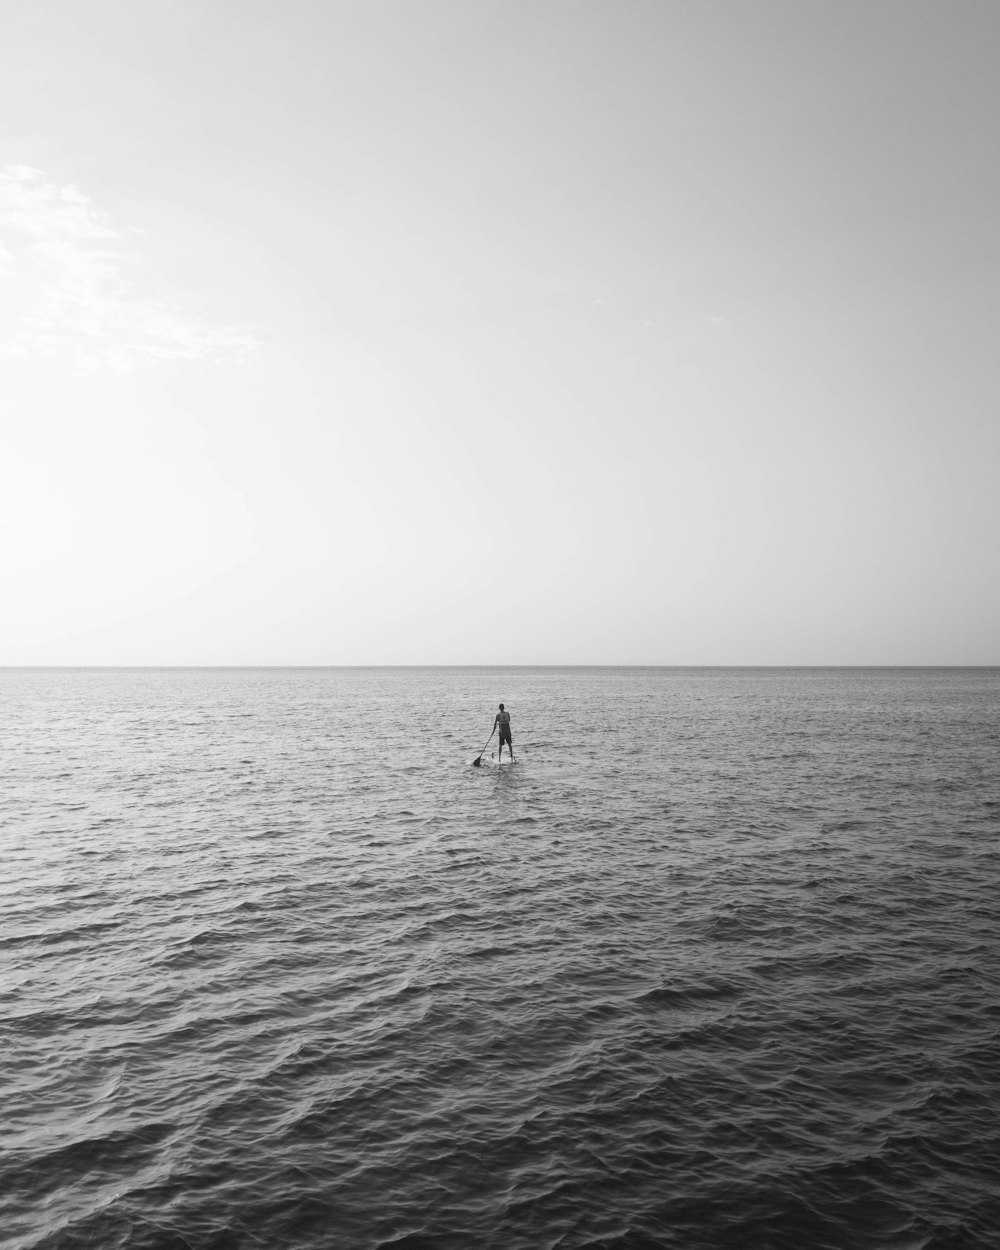 a person standing on a surfboard in the middle of the ocean